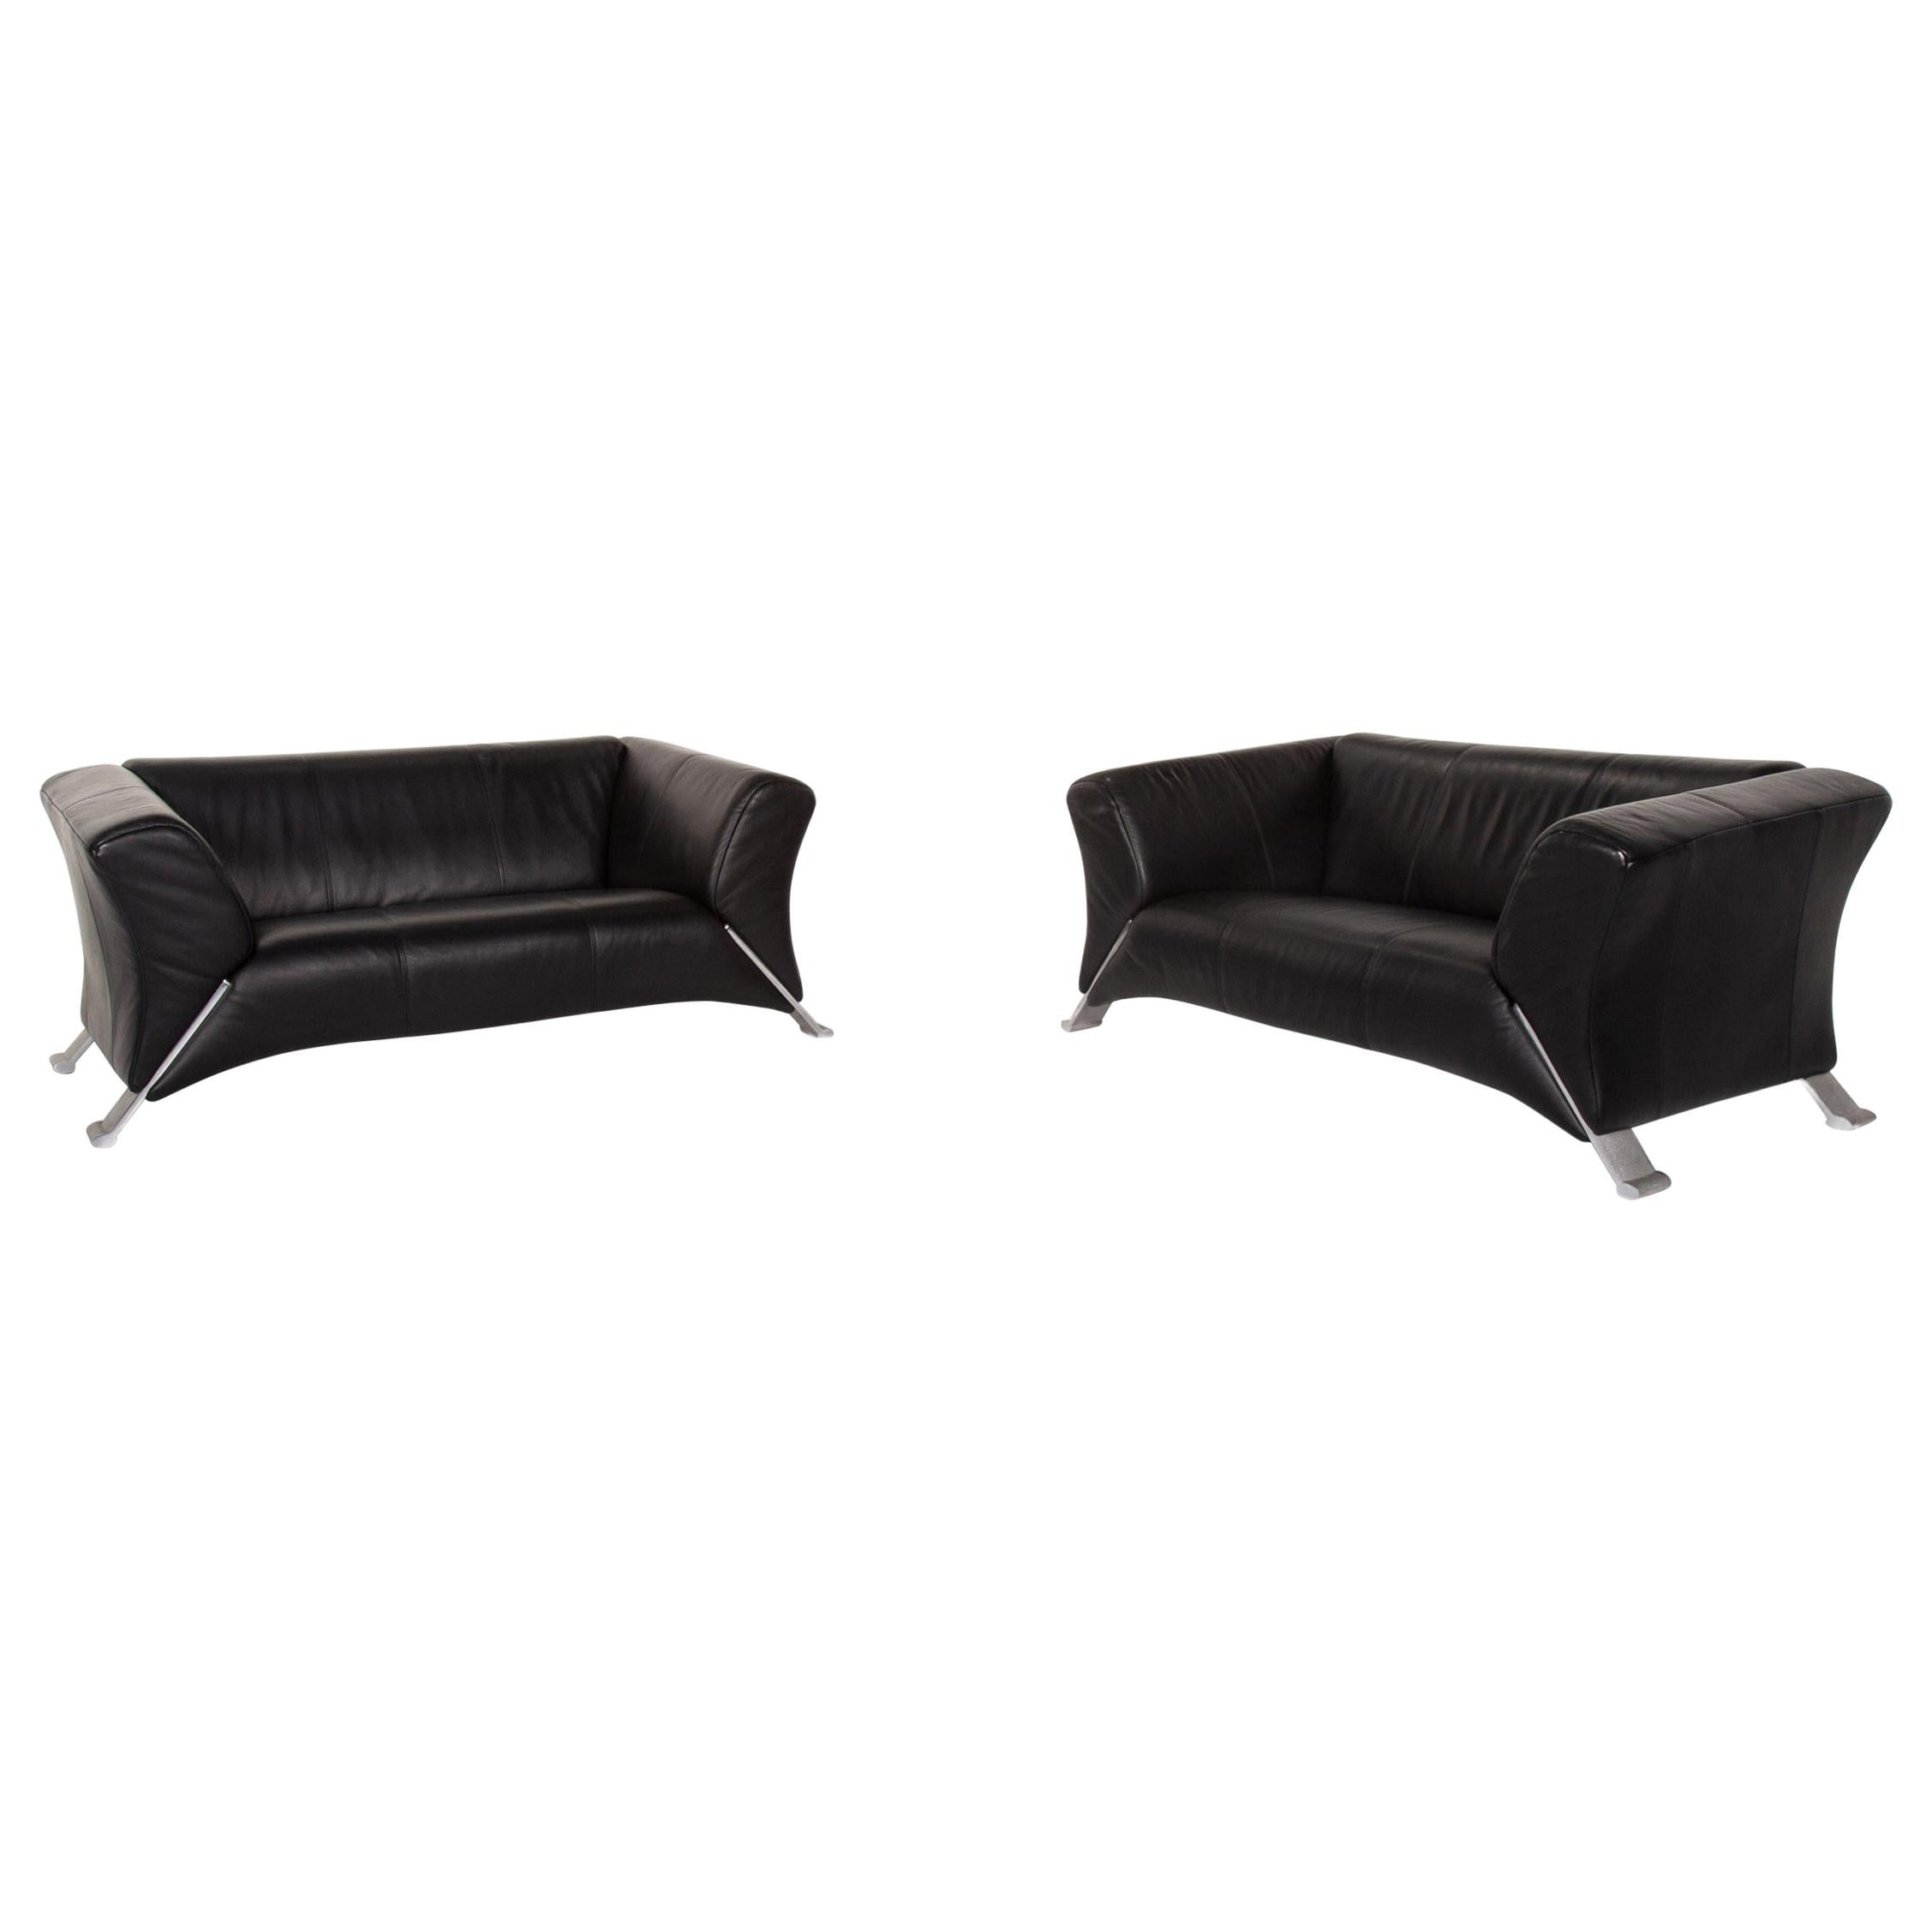 Rolf Benz 322 Sofa Set Black 2 Two-Seat For Sale